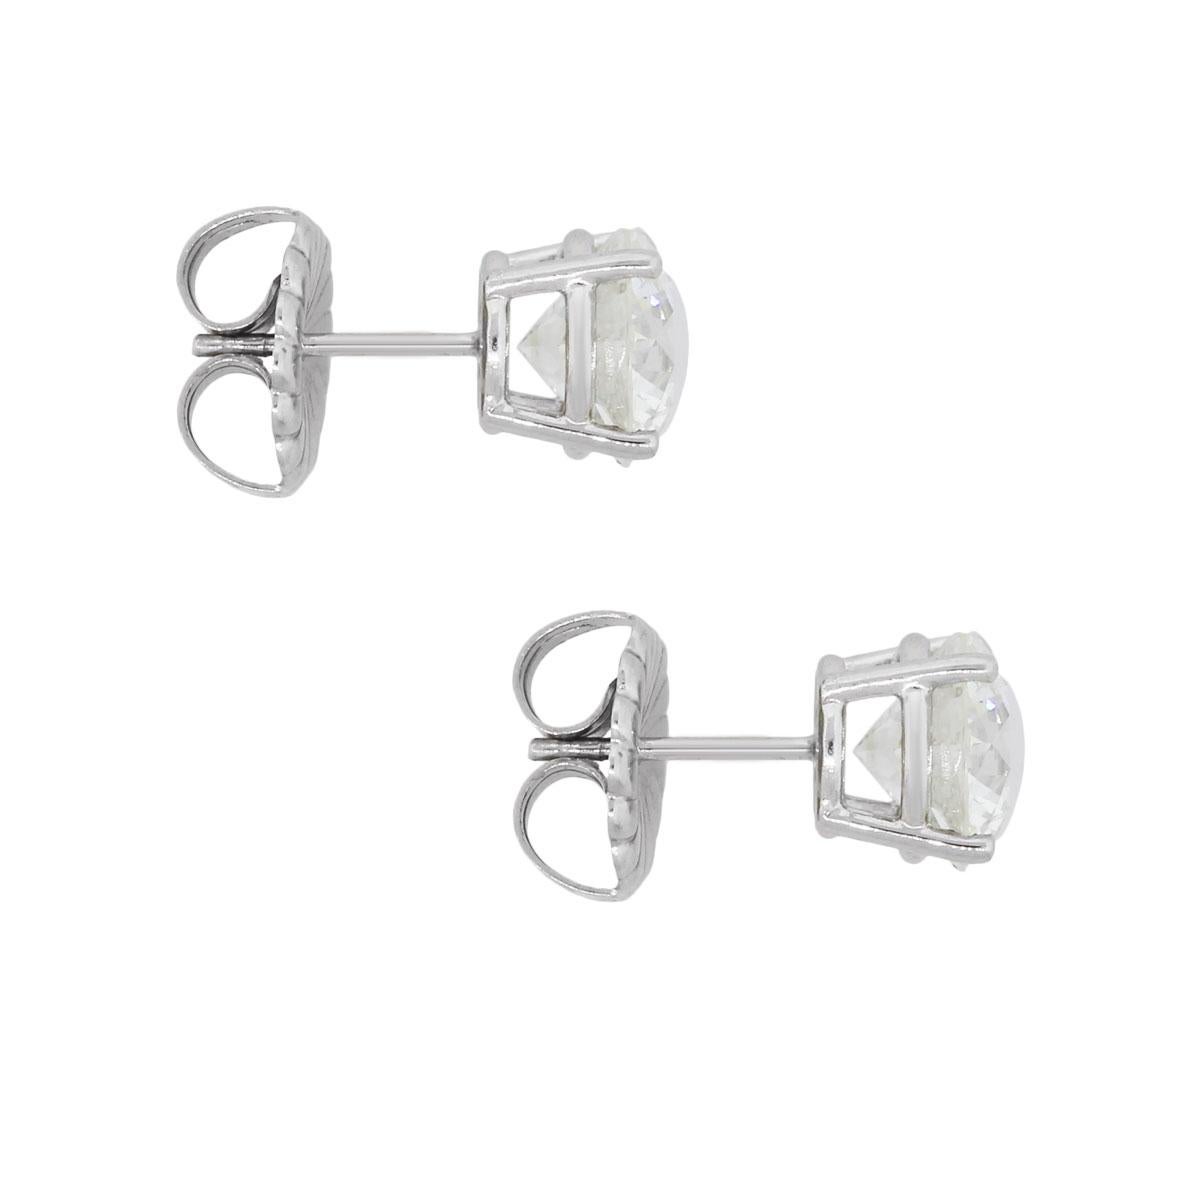 Material: 14k white gold
Diamond Details: Approximately 4.01ctw of round brilliant diamonds. Diamonds are I/J in color and I1 in clarity.
Earring Measurements: 0.62″ x 0.31″ x 0.31″
Earring Backs: Post friction
Total Weight: 3.1.g (2dwt)
Additional